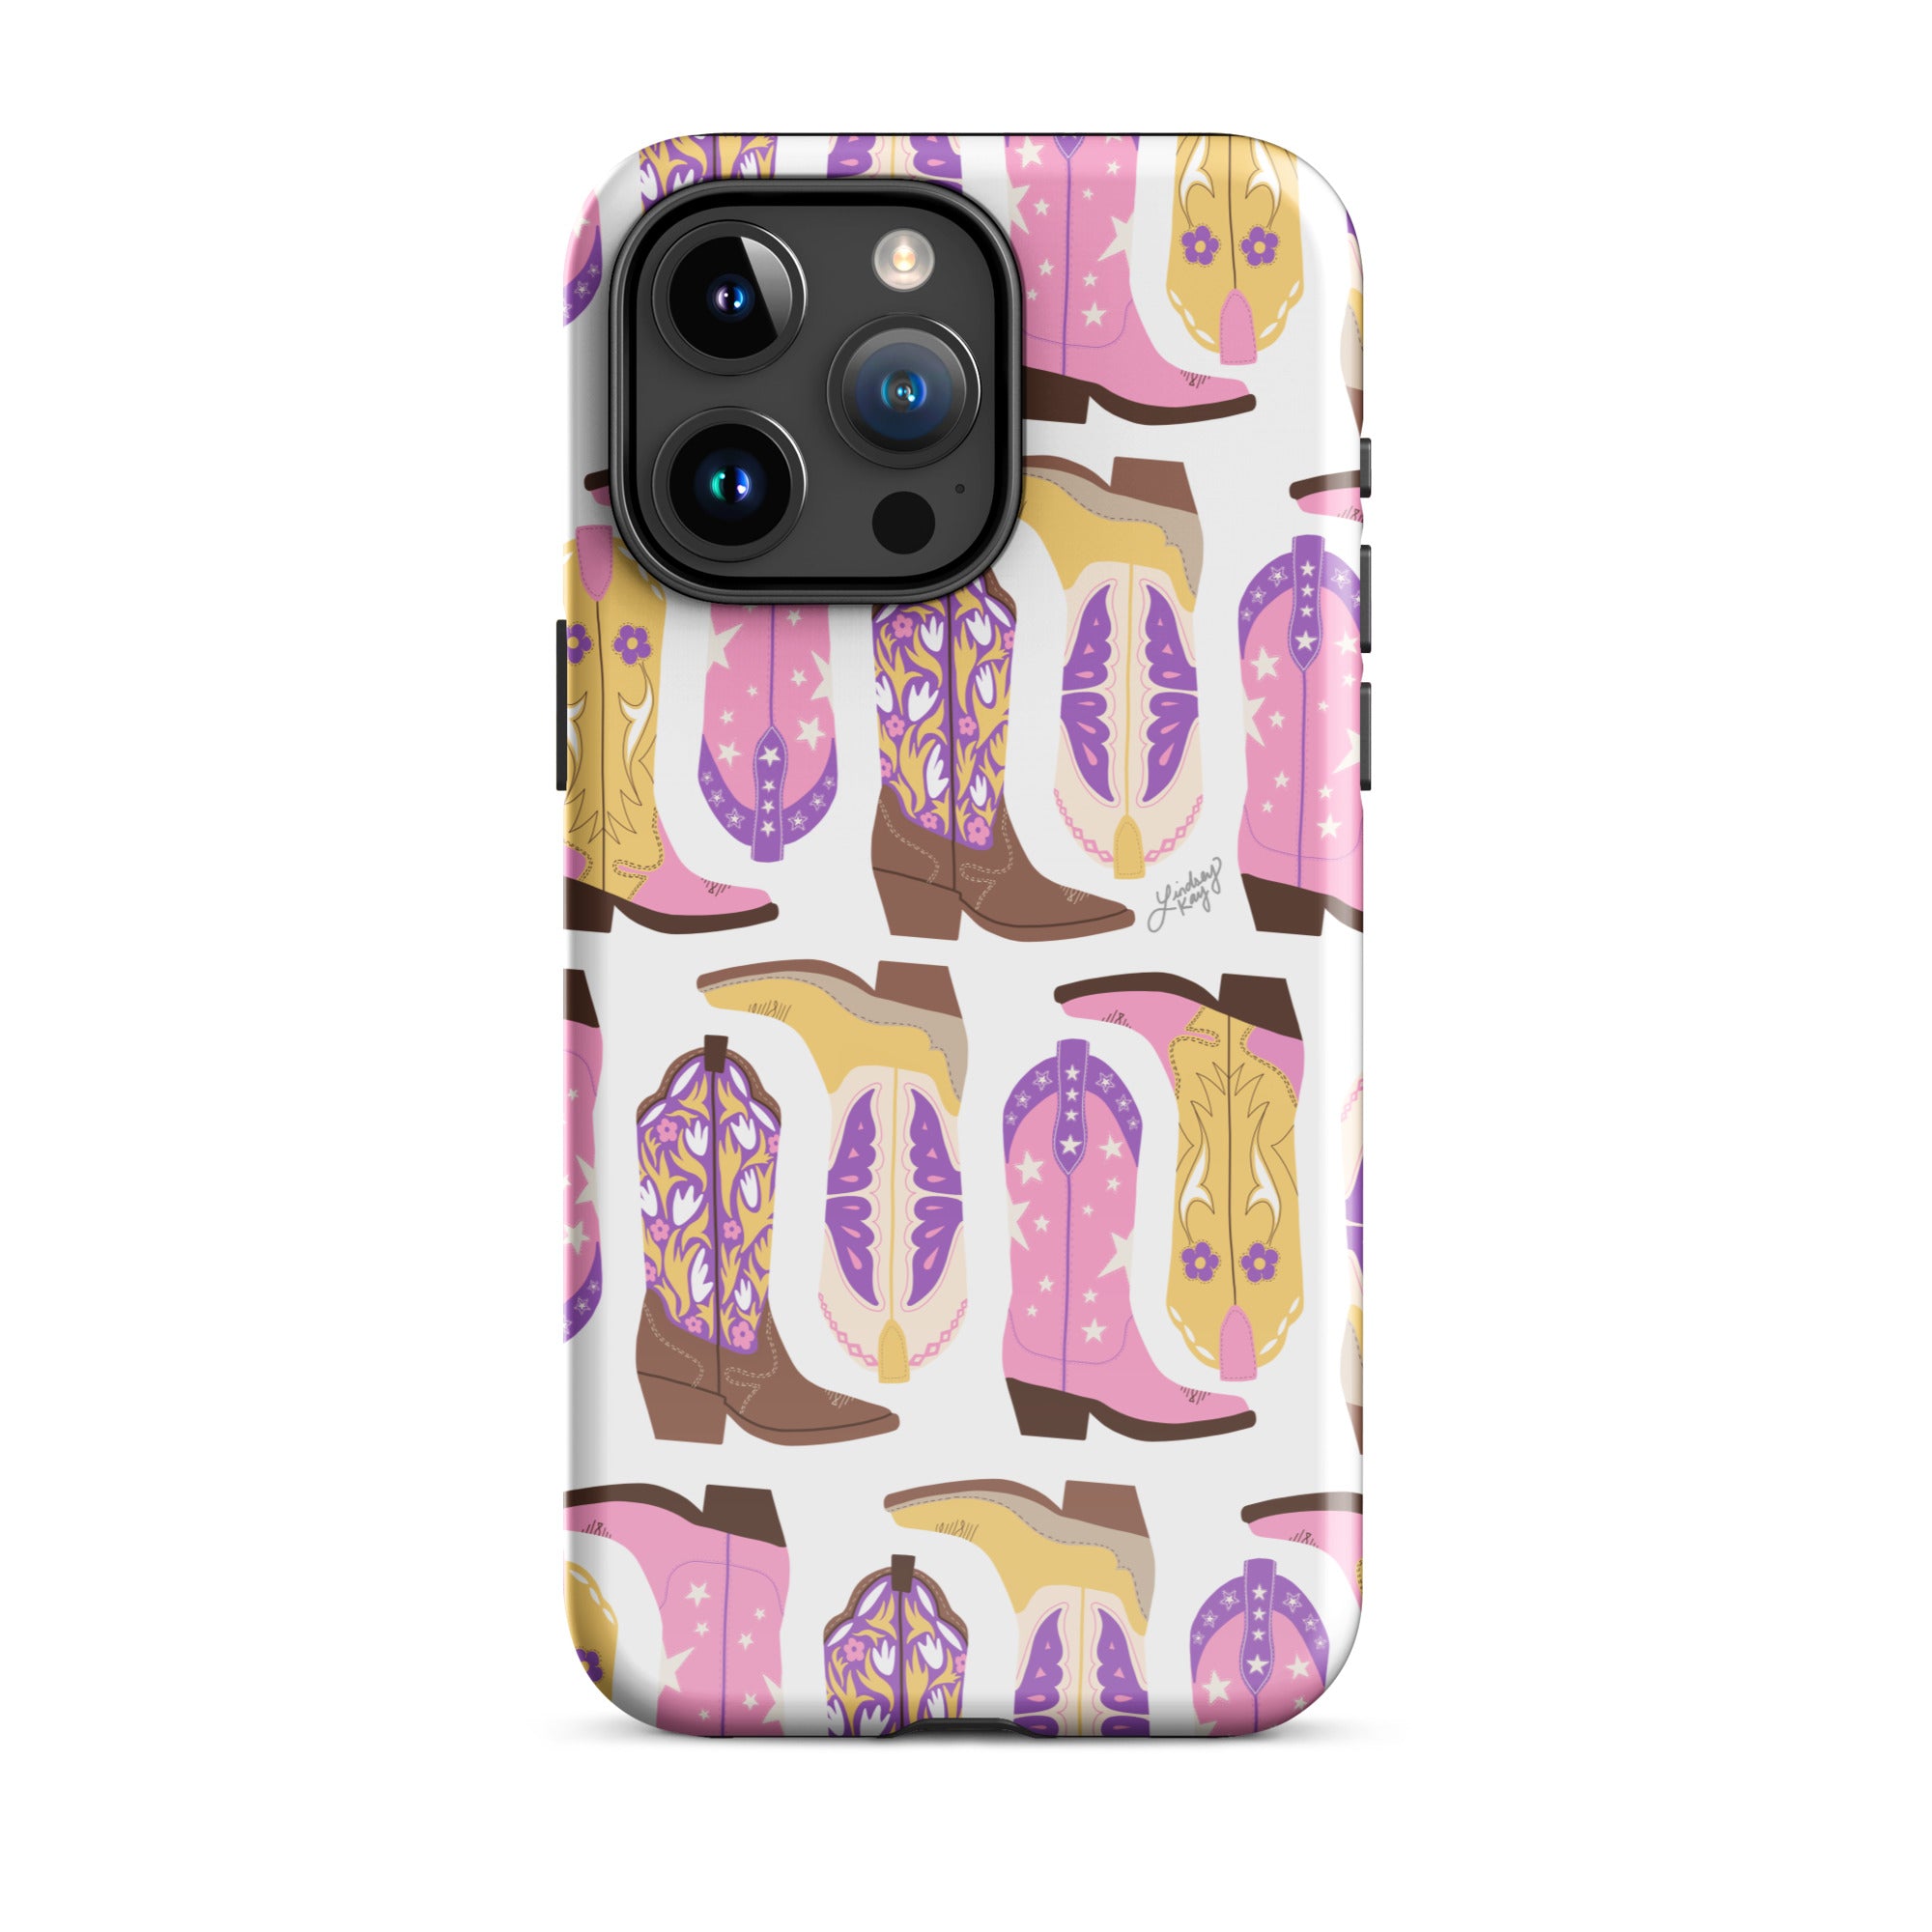 cowboy boots cowgirl western illustration pink purple yellow iphone phone case 15 iphone-max cover protector trendy western cute texas lindsey kay collective